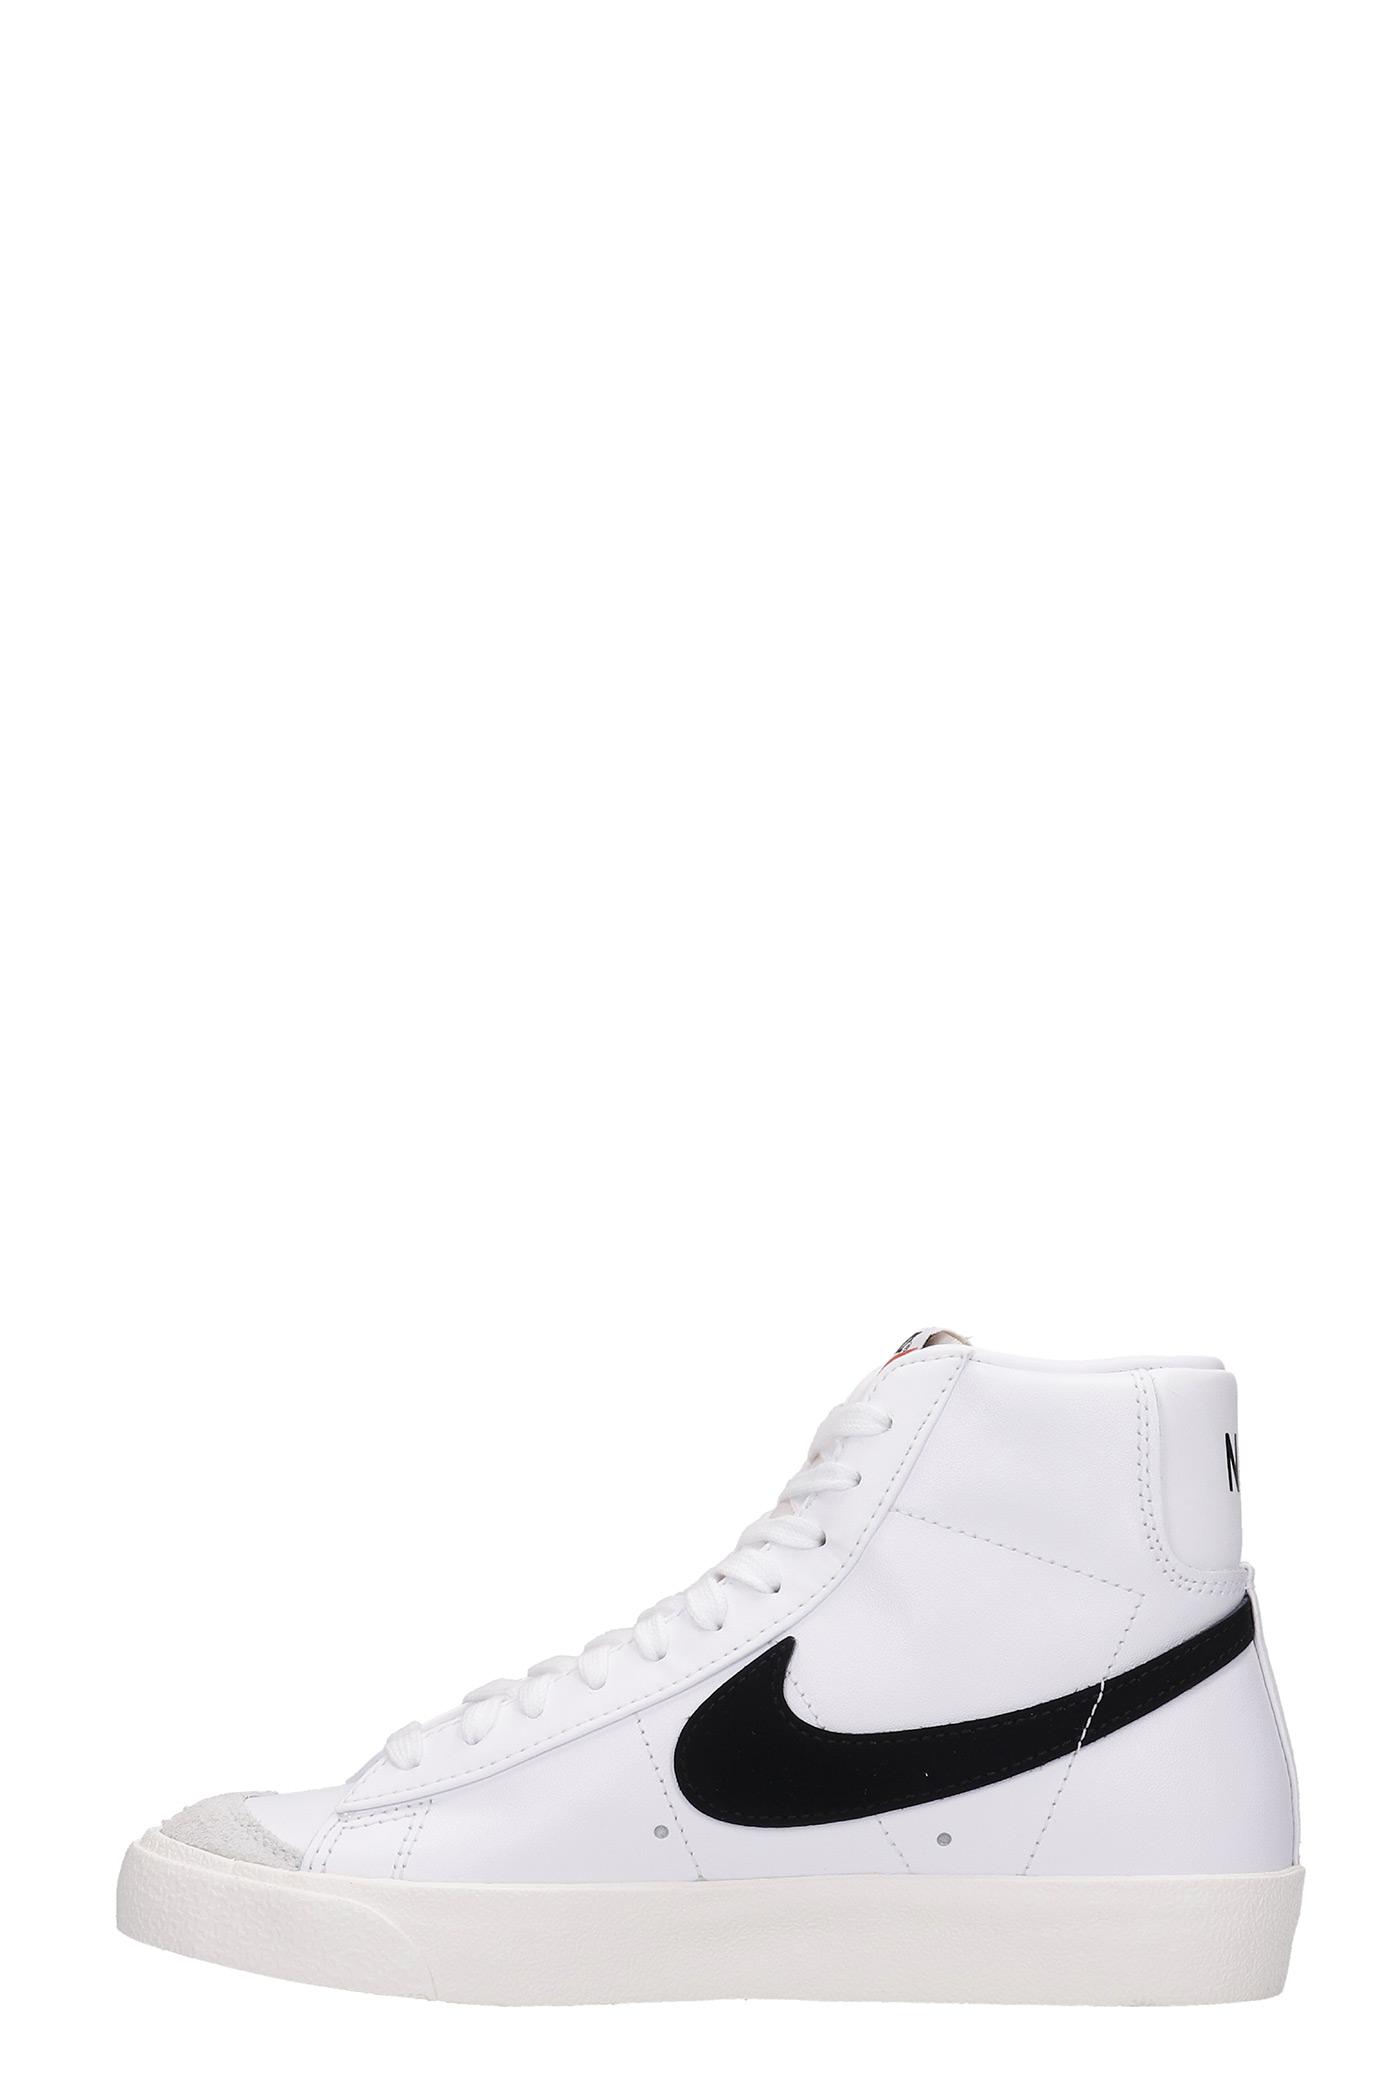 Nike Blazer Mid 77 Sneakers In White Leather | Lyst